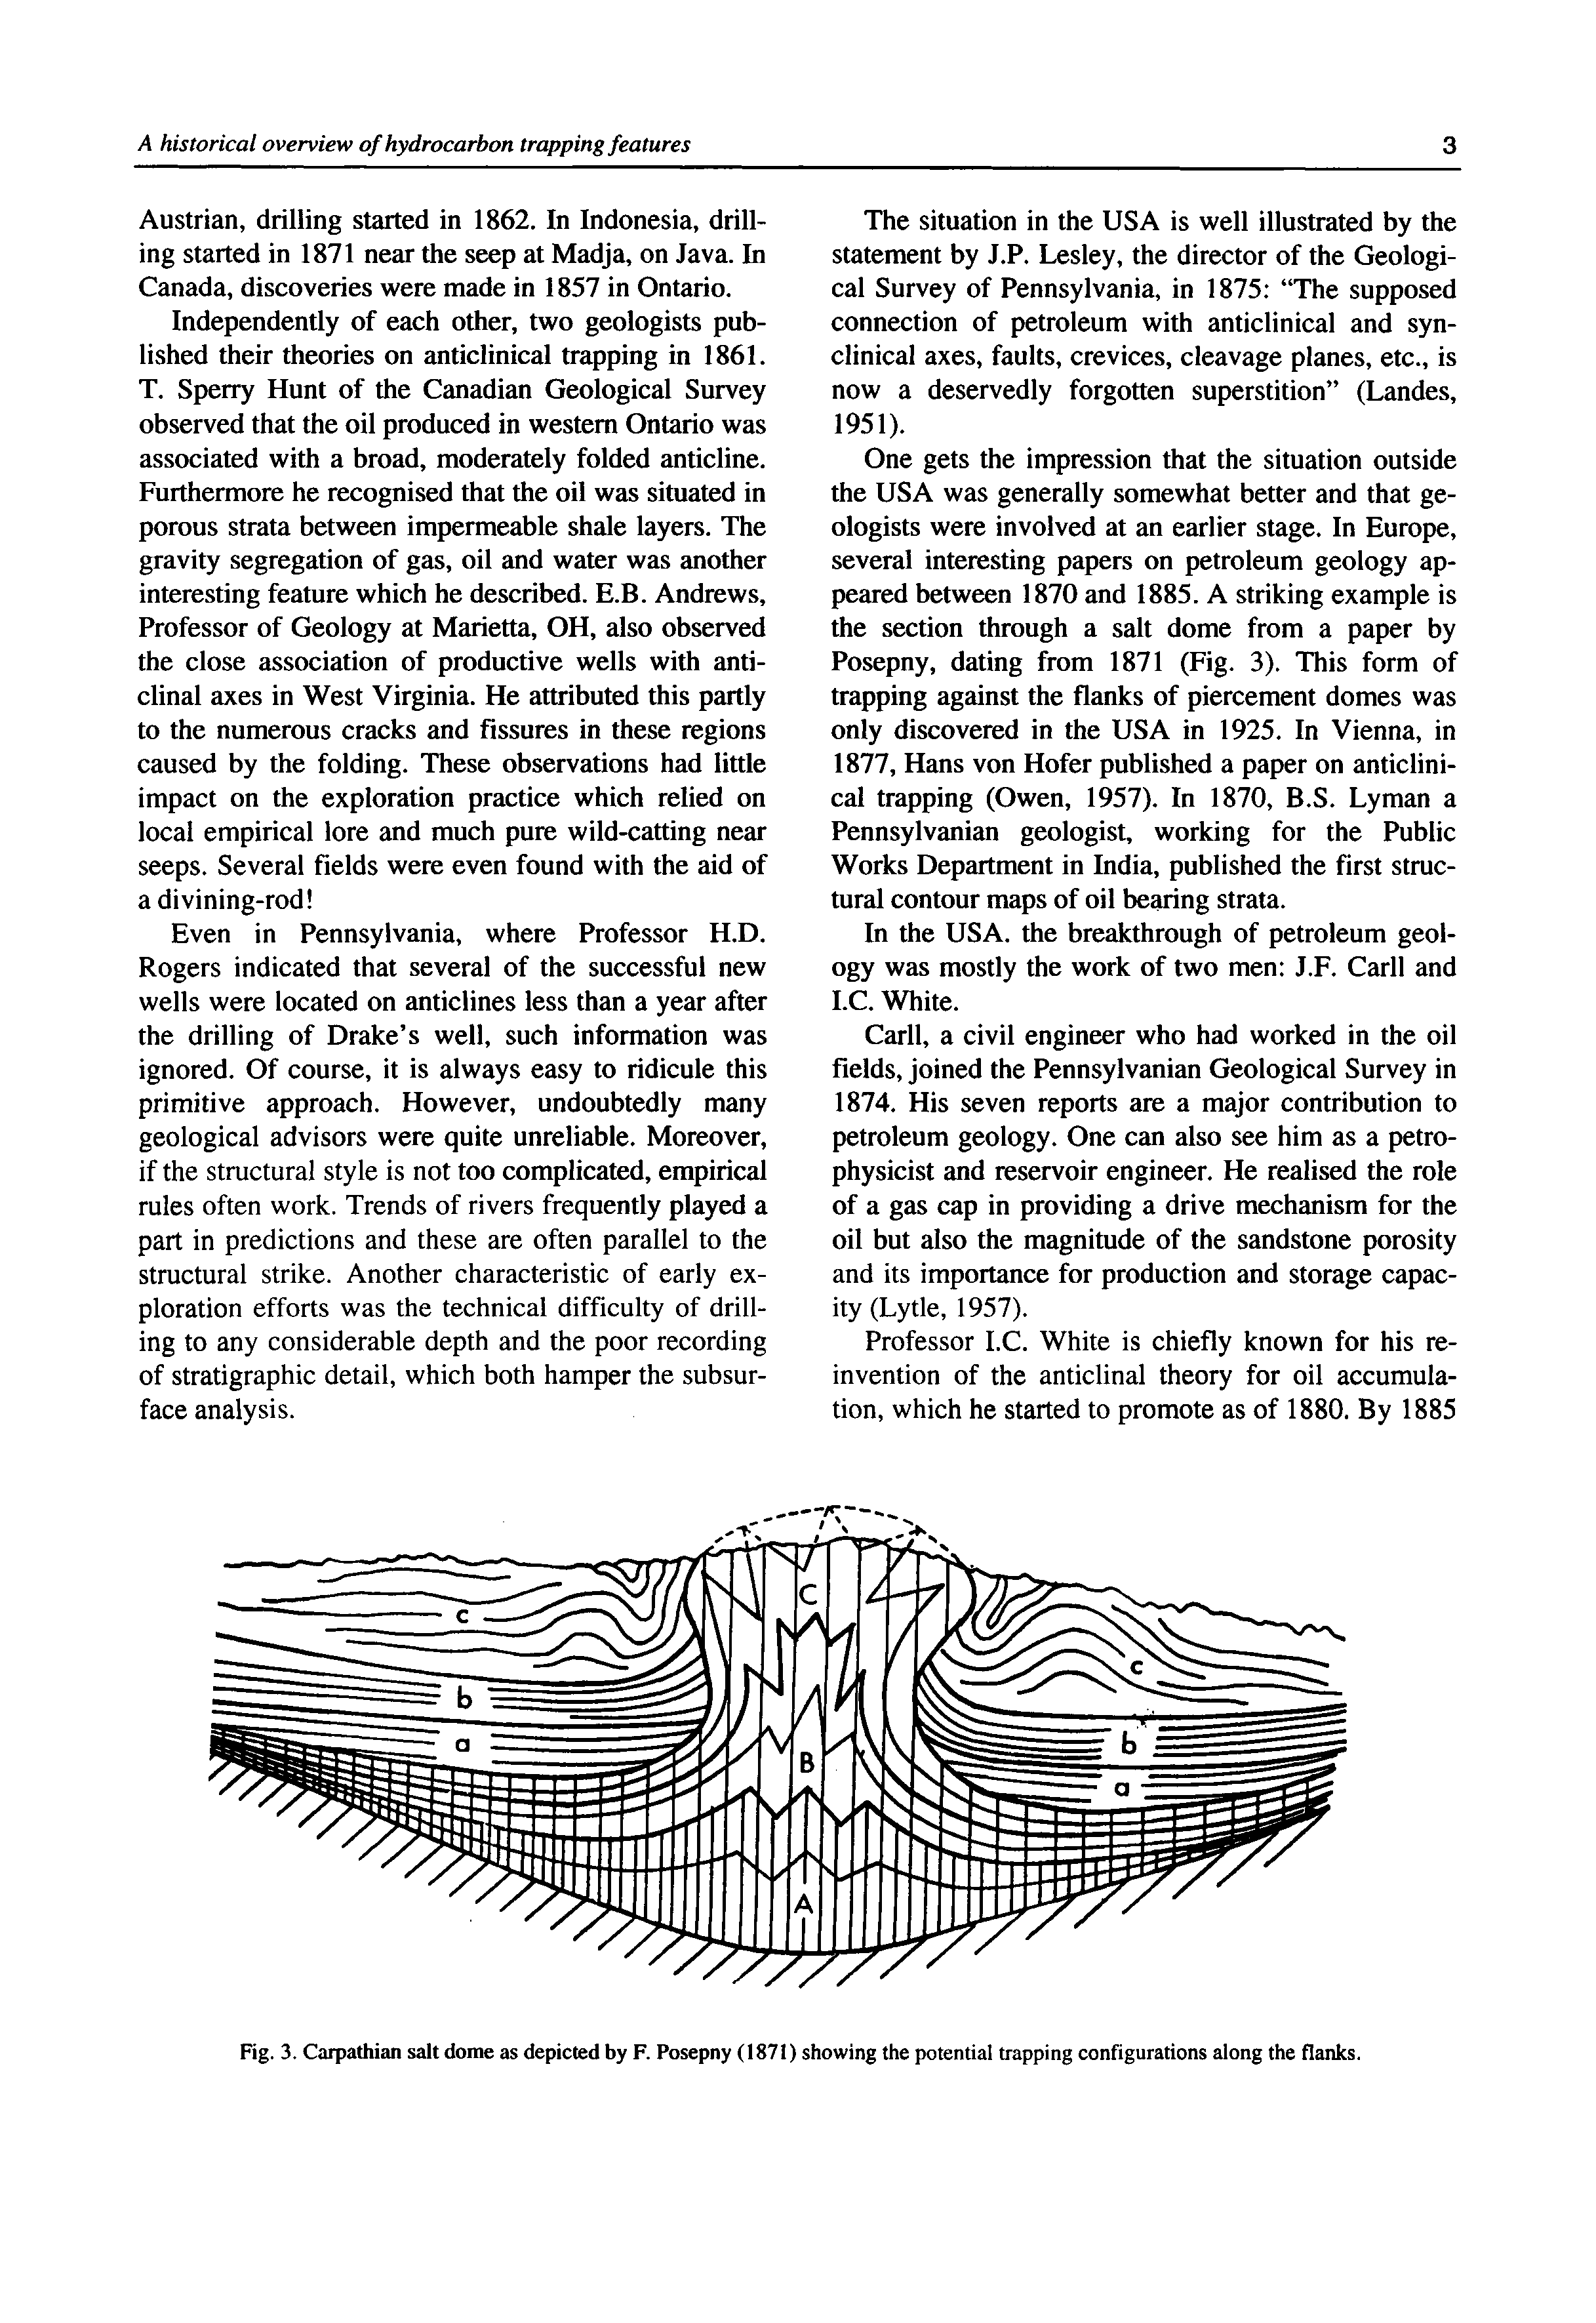 Fig. 3. Carpathian salt dome as depicted by F. Posepny (1871) showing the potential trapping configurations along the flanks.